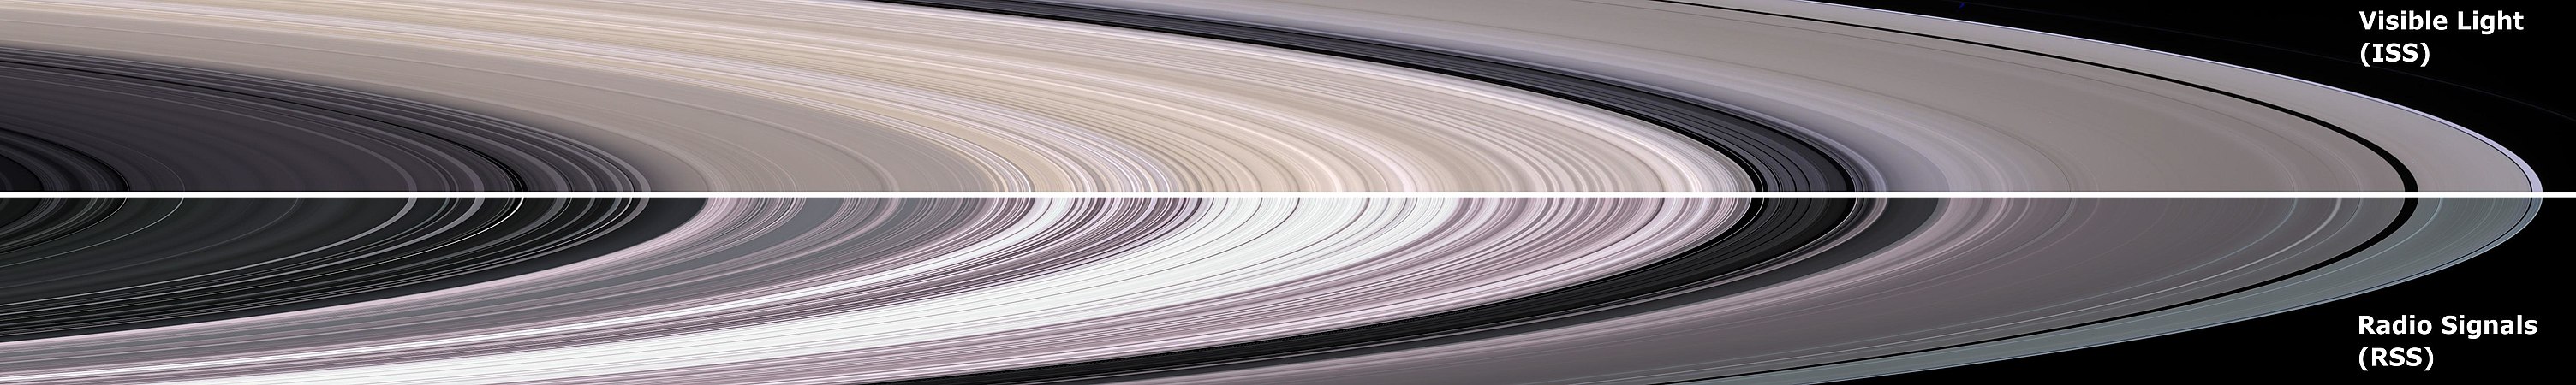 The rings of Saturn in visible light and radio, by NASA/JPL/Space Science Institute